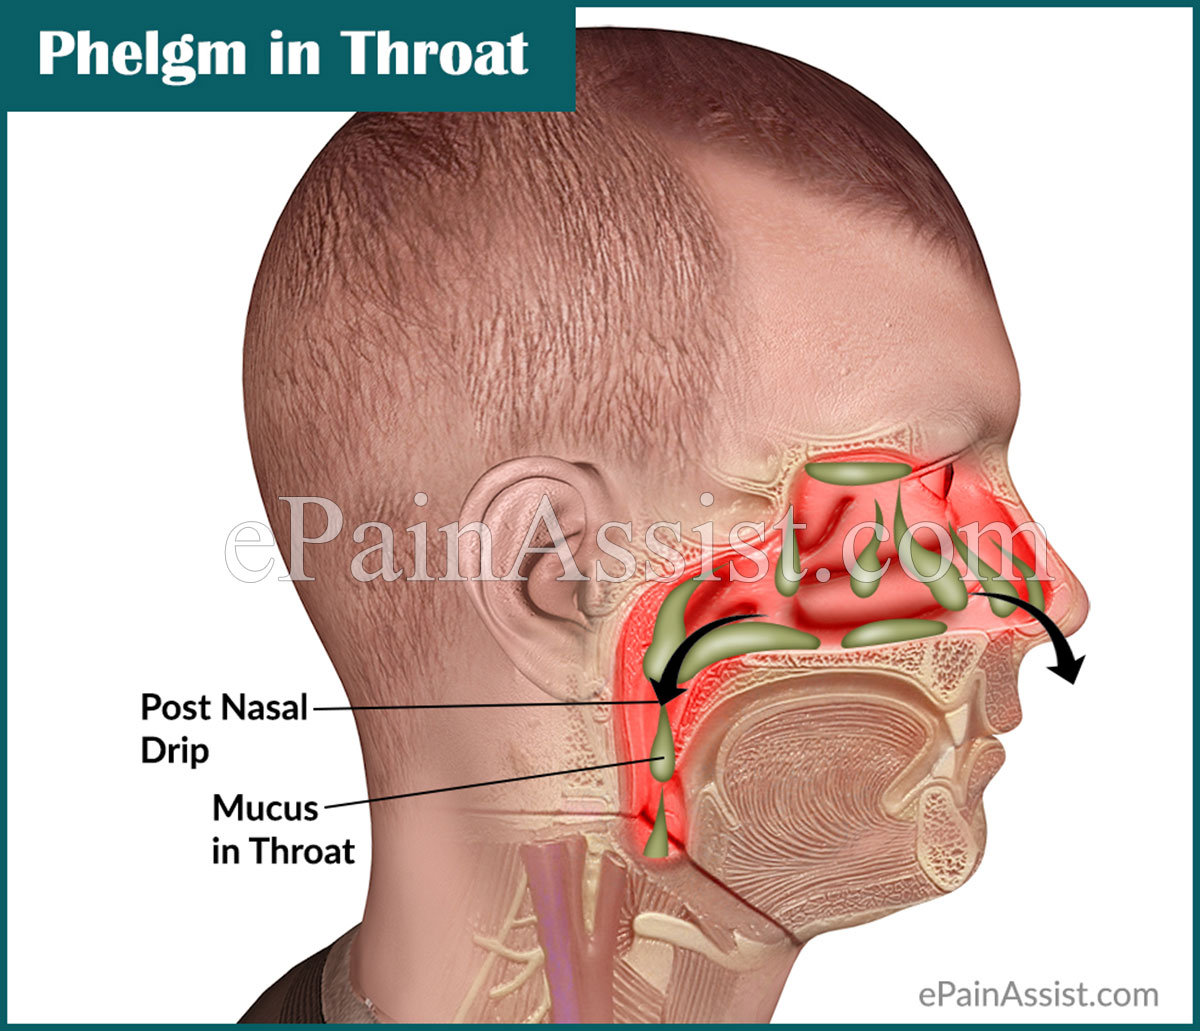 Phlegm in Throat or Mucus in Throat: Causes & Ways to Get of